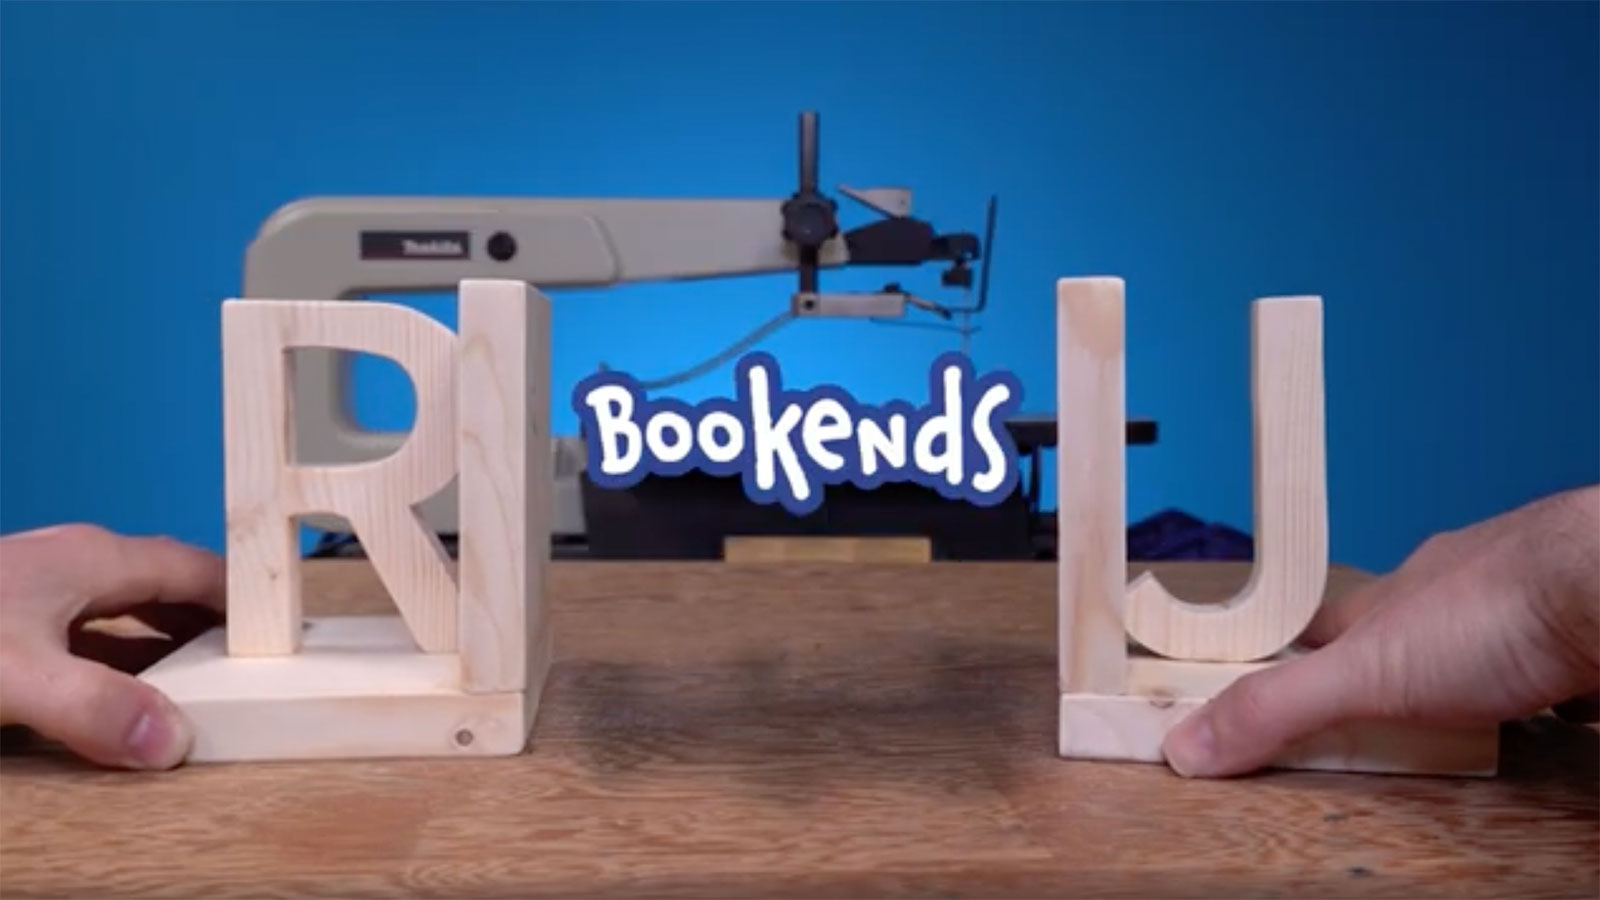 craft-bookends-feat